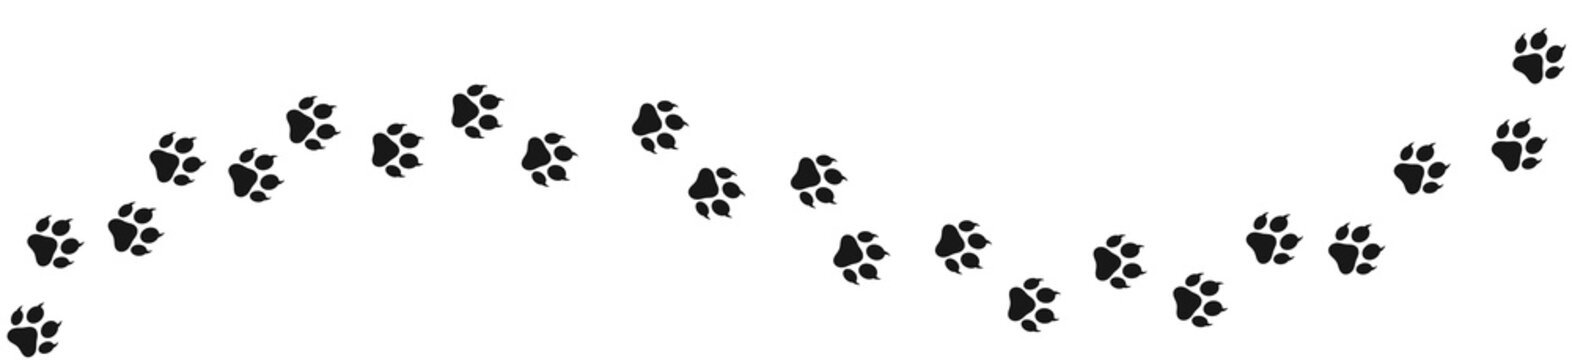 Paw print of dog isolated on transparent background. cat paw print. cat walk foot print. Paw print of dog PNG